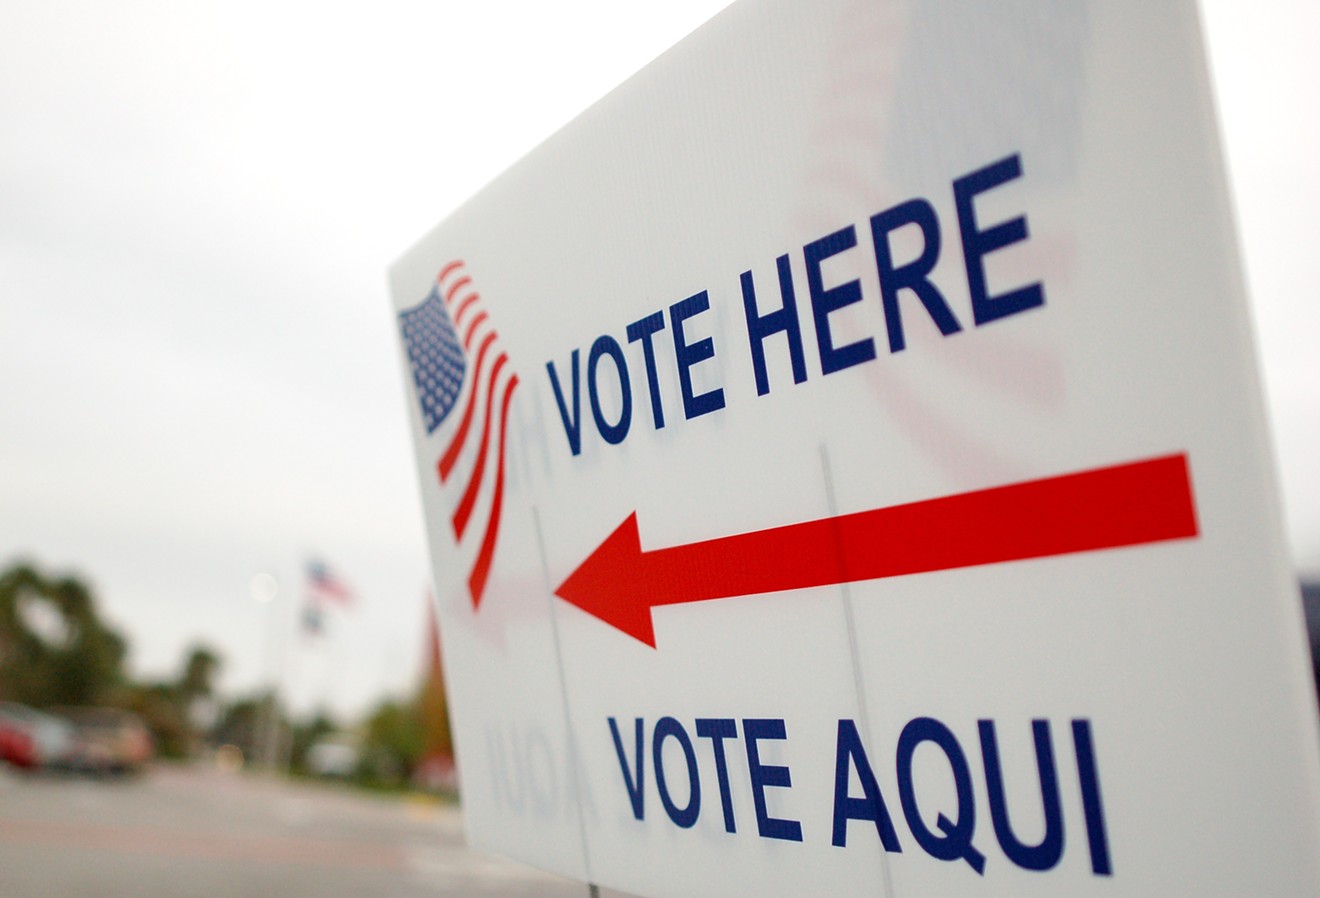 Here's everything you need to know before casting your vote.